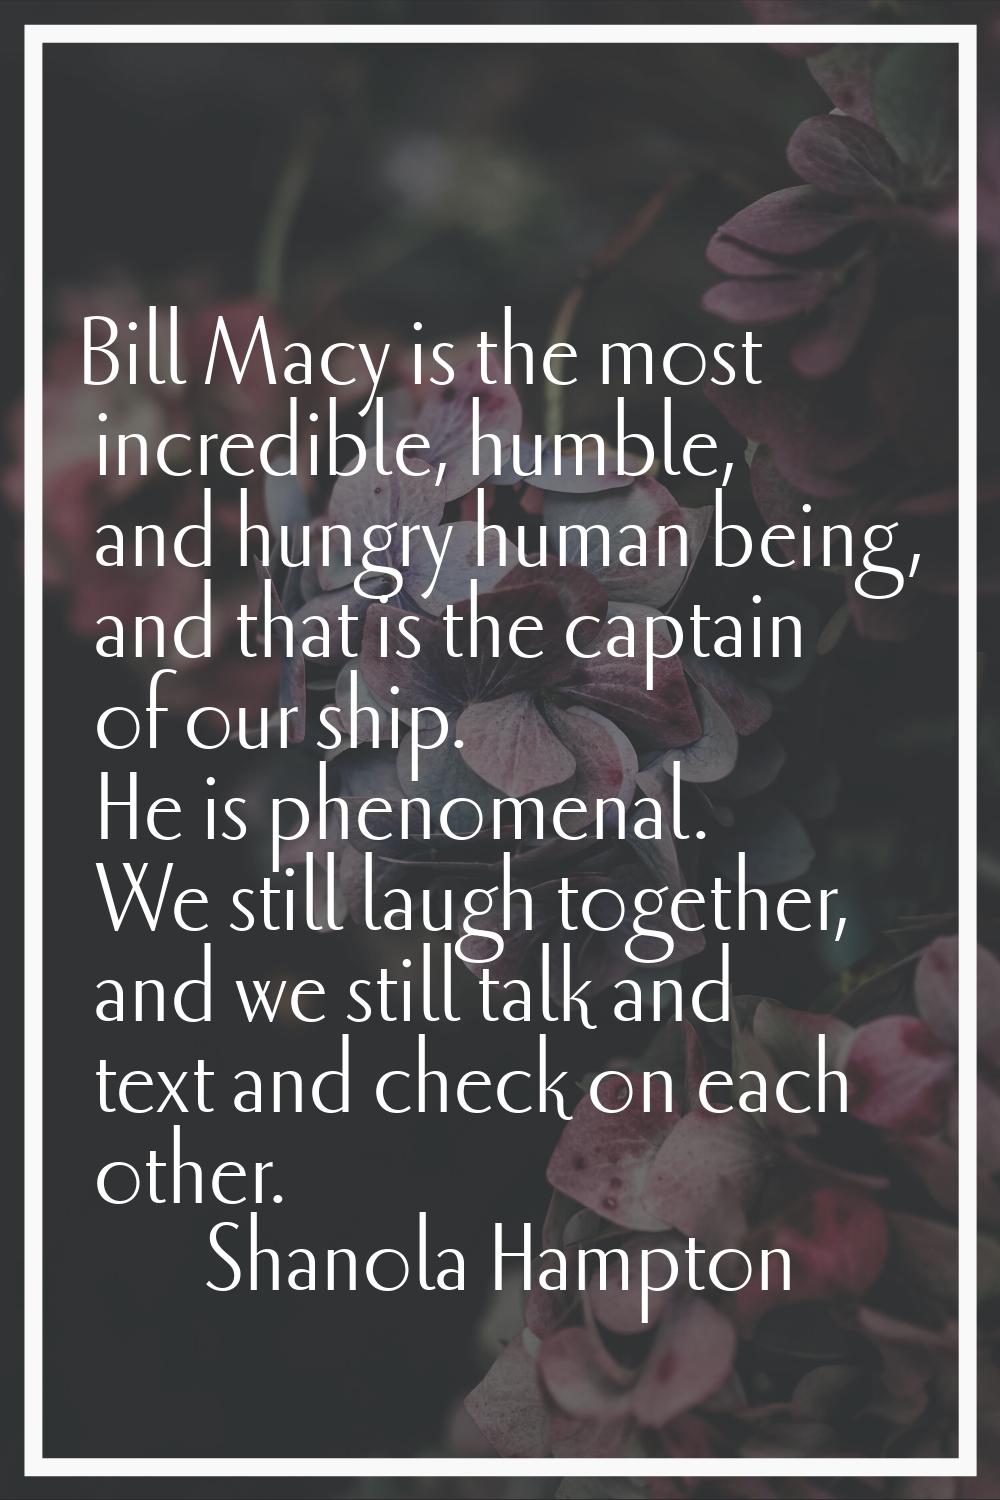 Bill Macy is the most incredible, humble, and hungry human being, and that is the captain of our sh